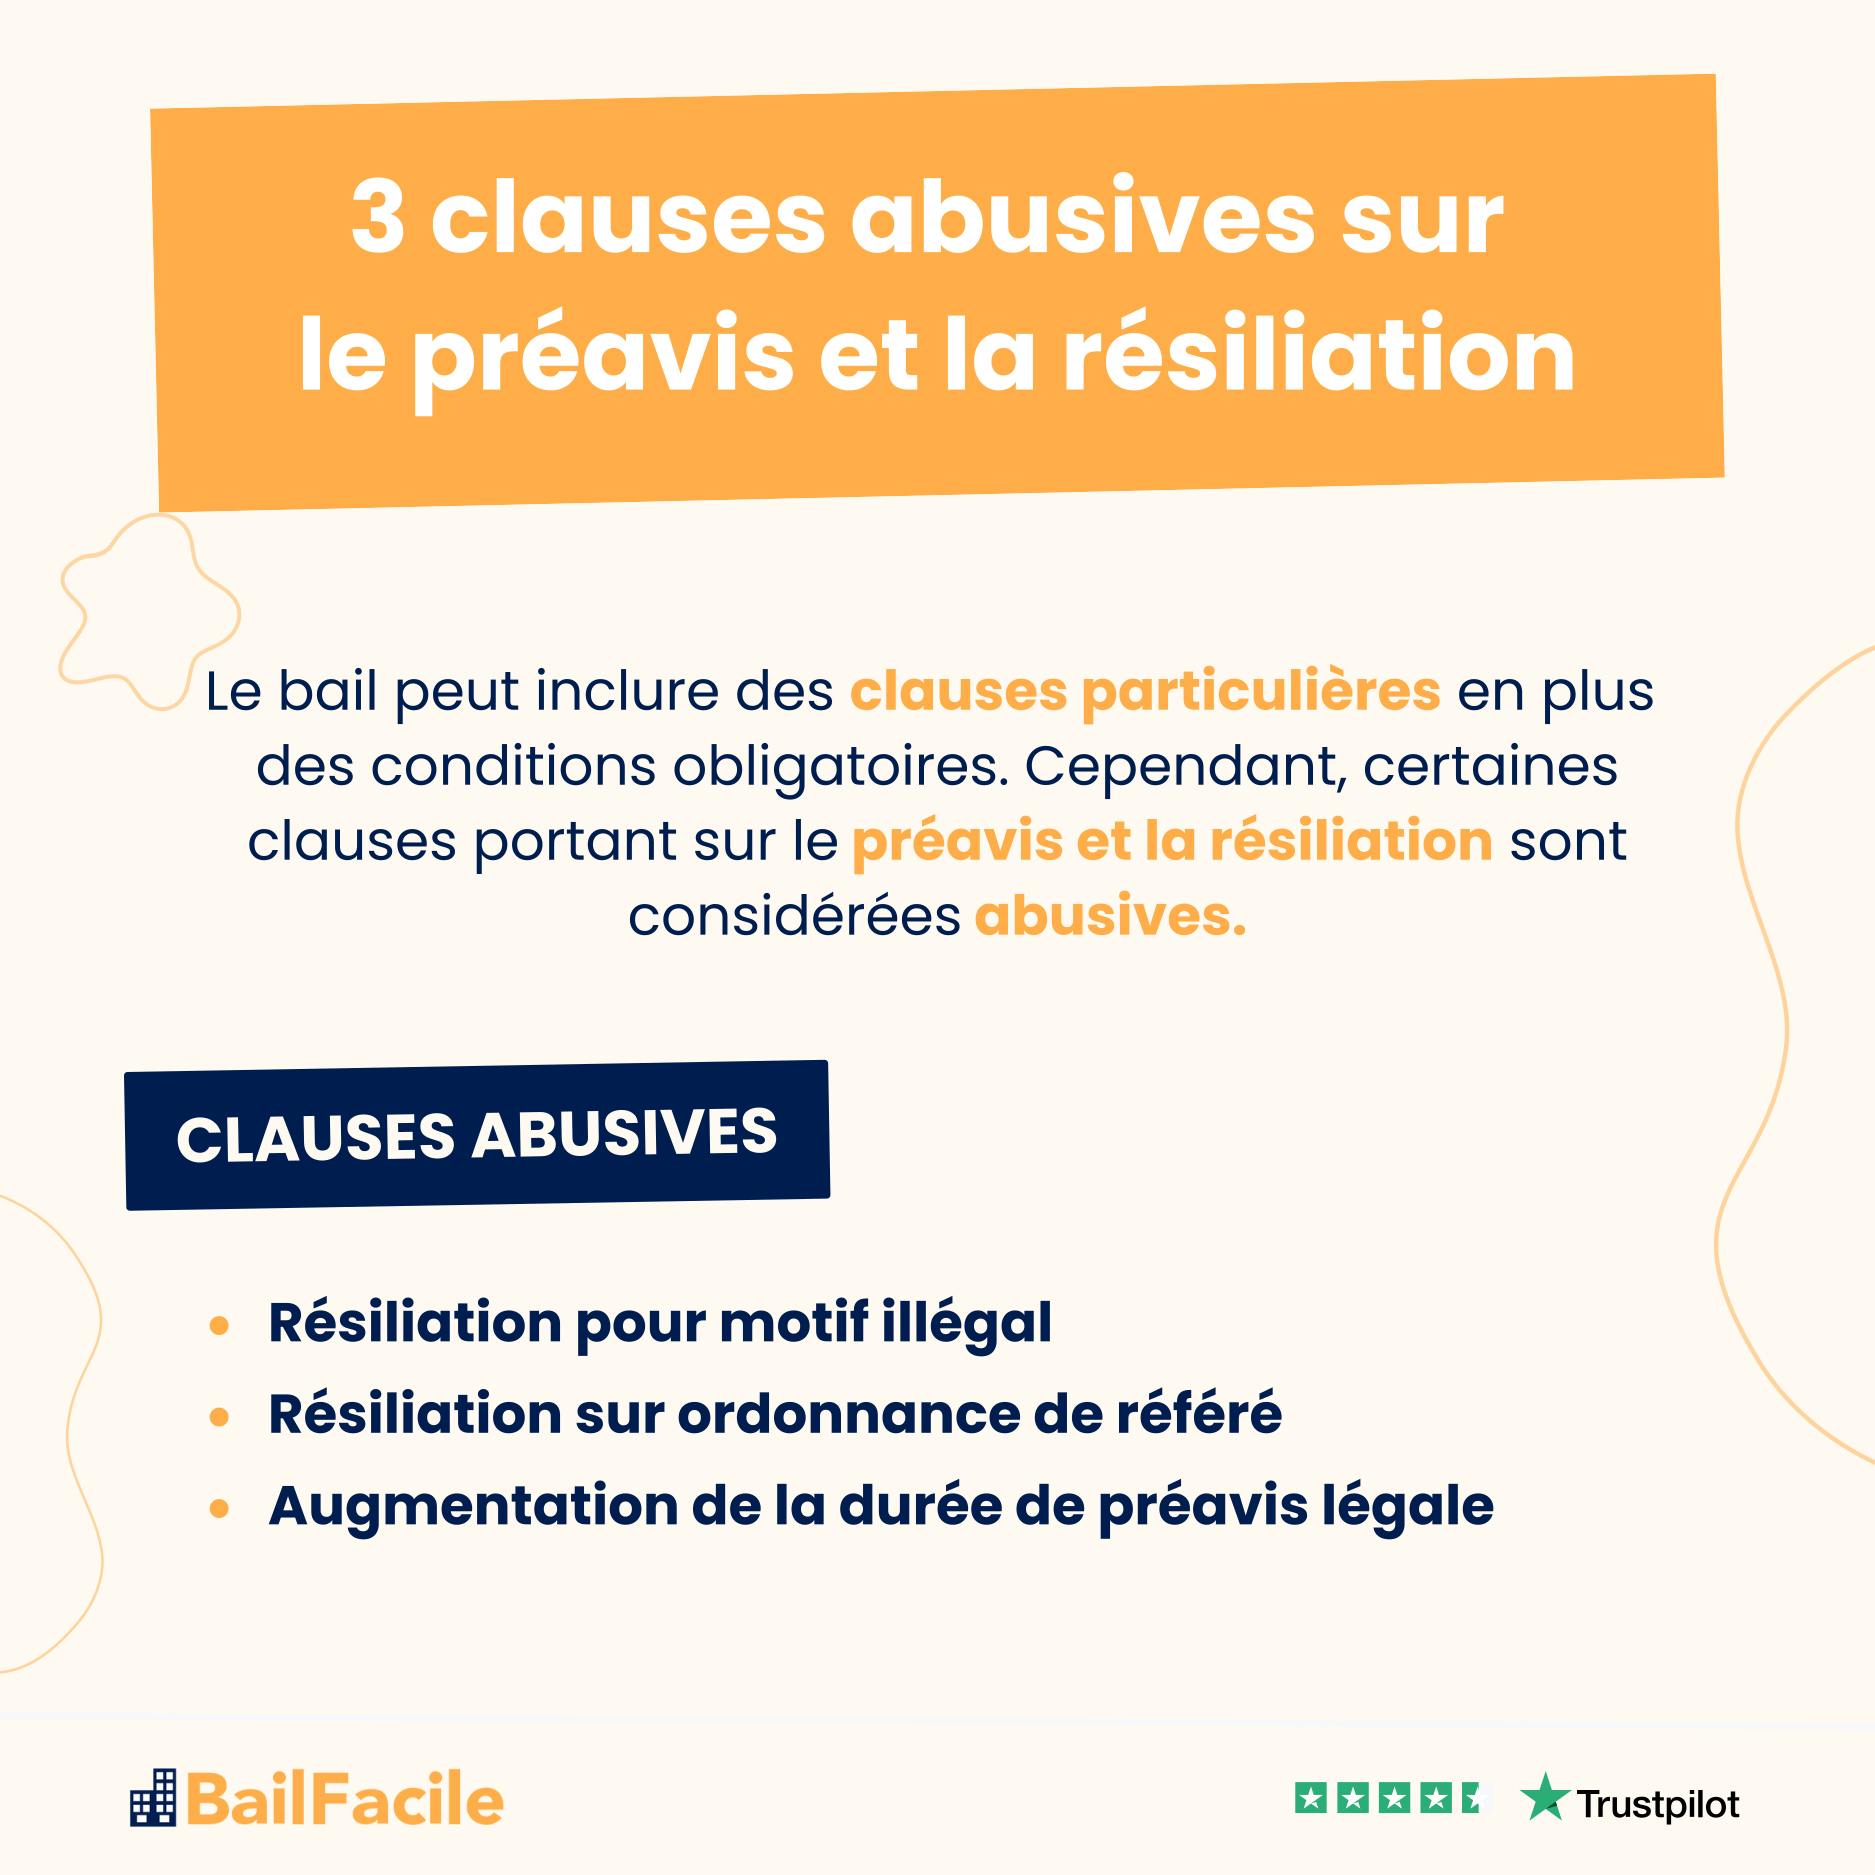 clauses abusives preavis resiliation